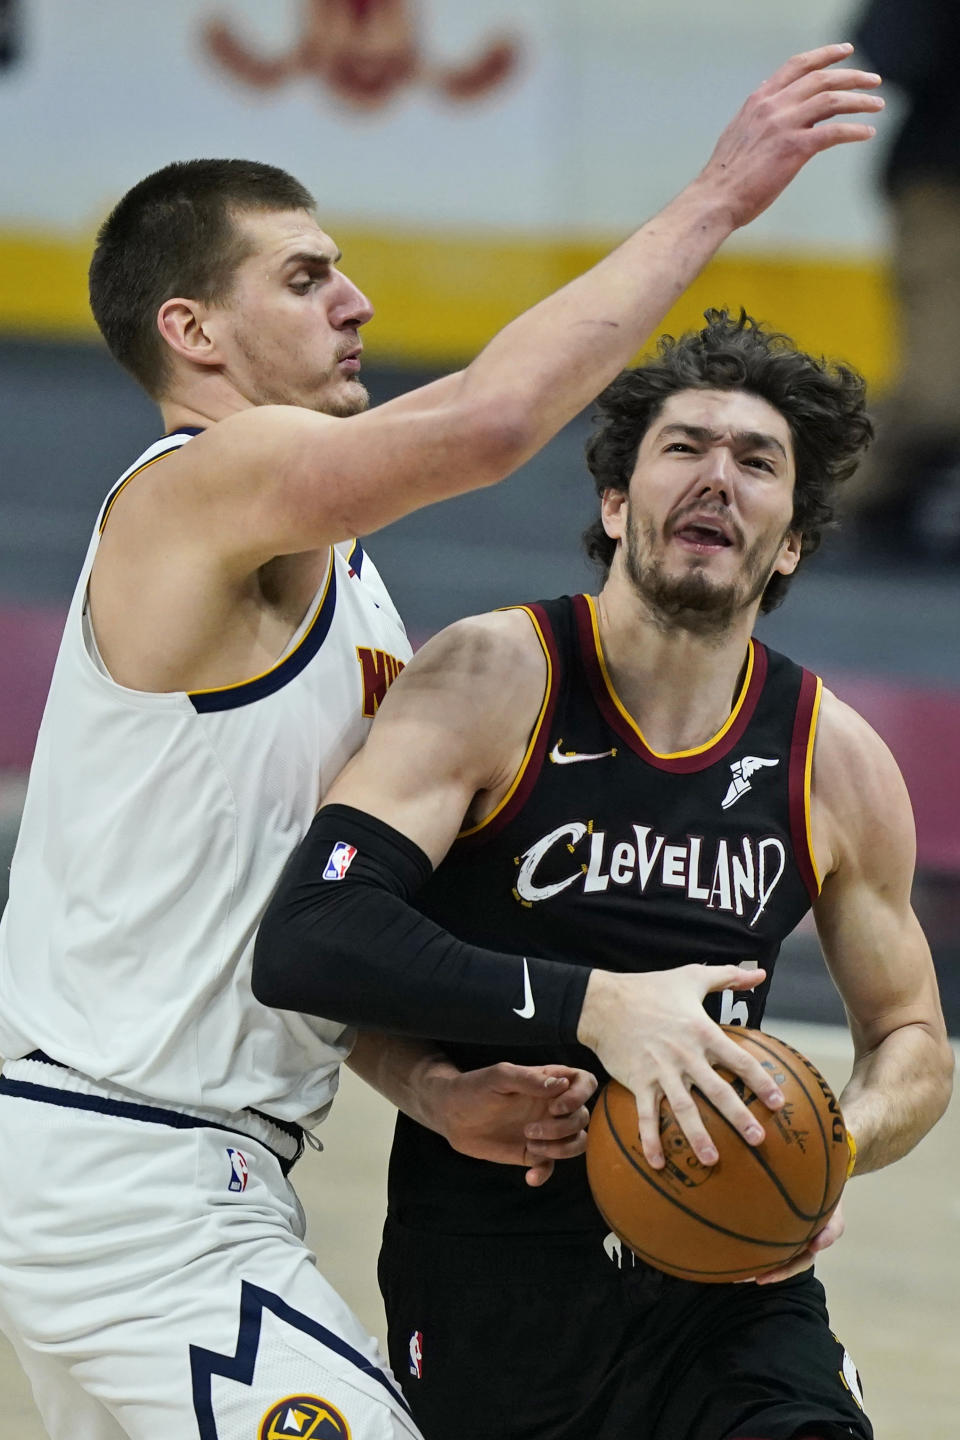 Cleveland Cavaliers' Cedi Osman, right, drives as Denver Nuggets' Nikola Jokic defends during the first half of an NBA basketball game Friday, Feb. 19, 2021, in Cleveland. (AP Photo/Tony Dejak)